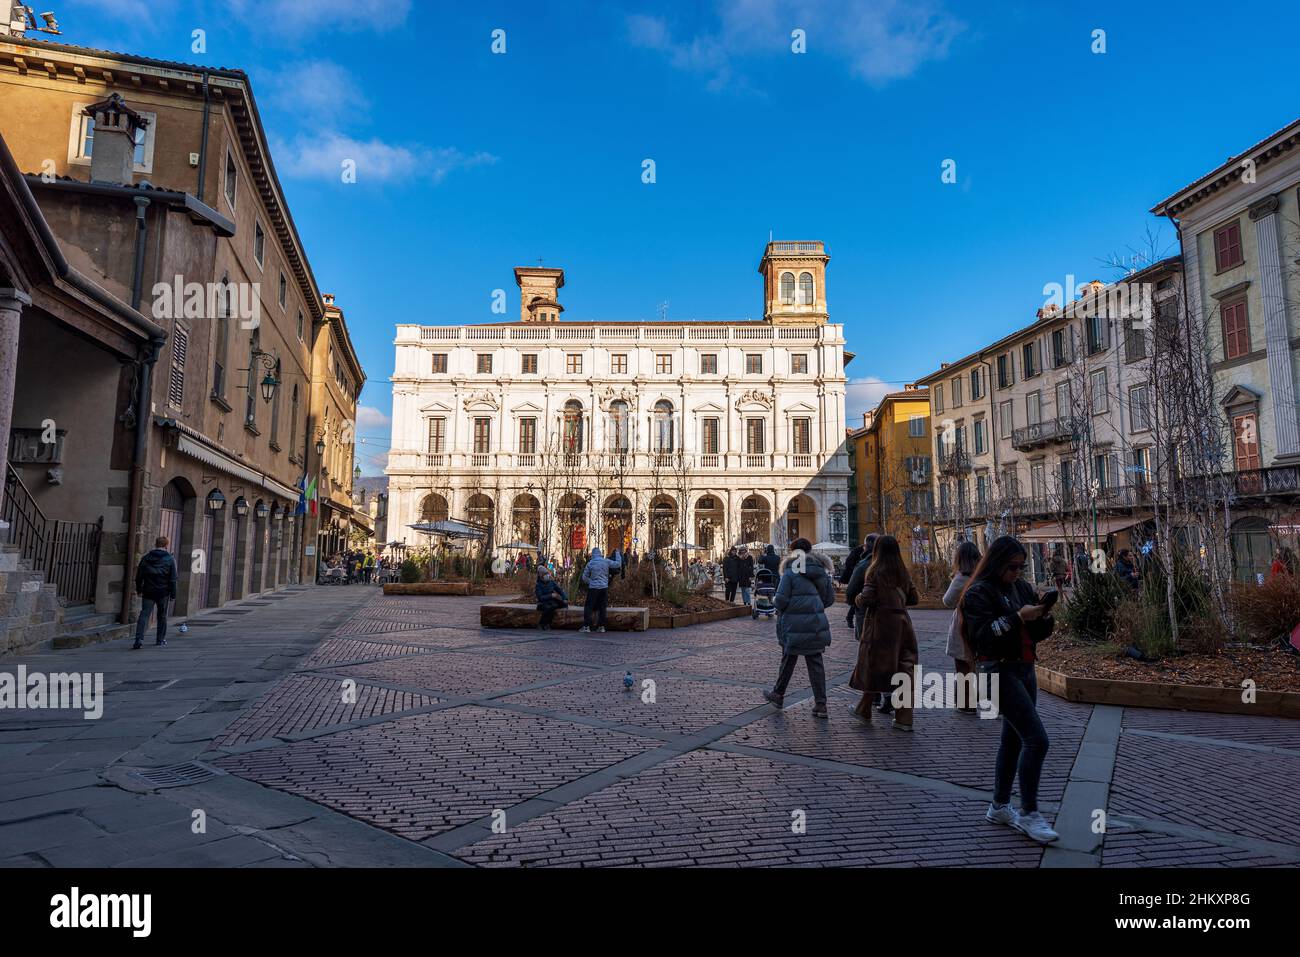 Palazzo Nuovo (New Palace) in Renaissance style, 1600-1958, inside is the Civic Library Angelo Mai, Bergamo upper town, Lombardy, Italy, Europe. Stock Photo